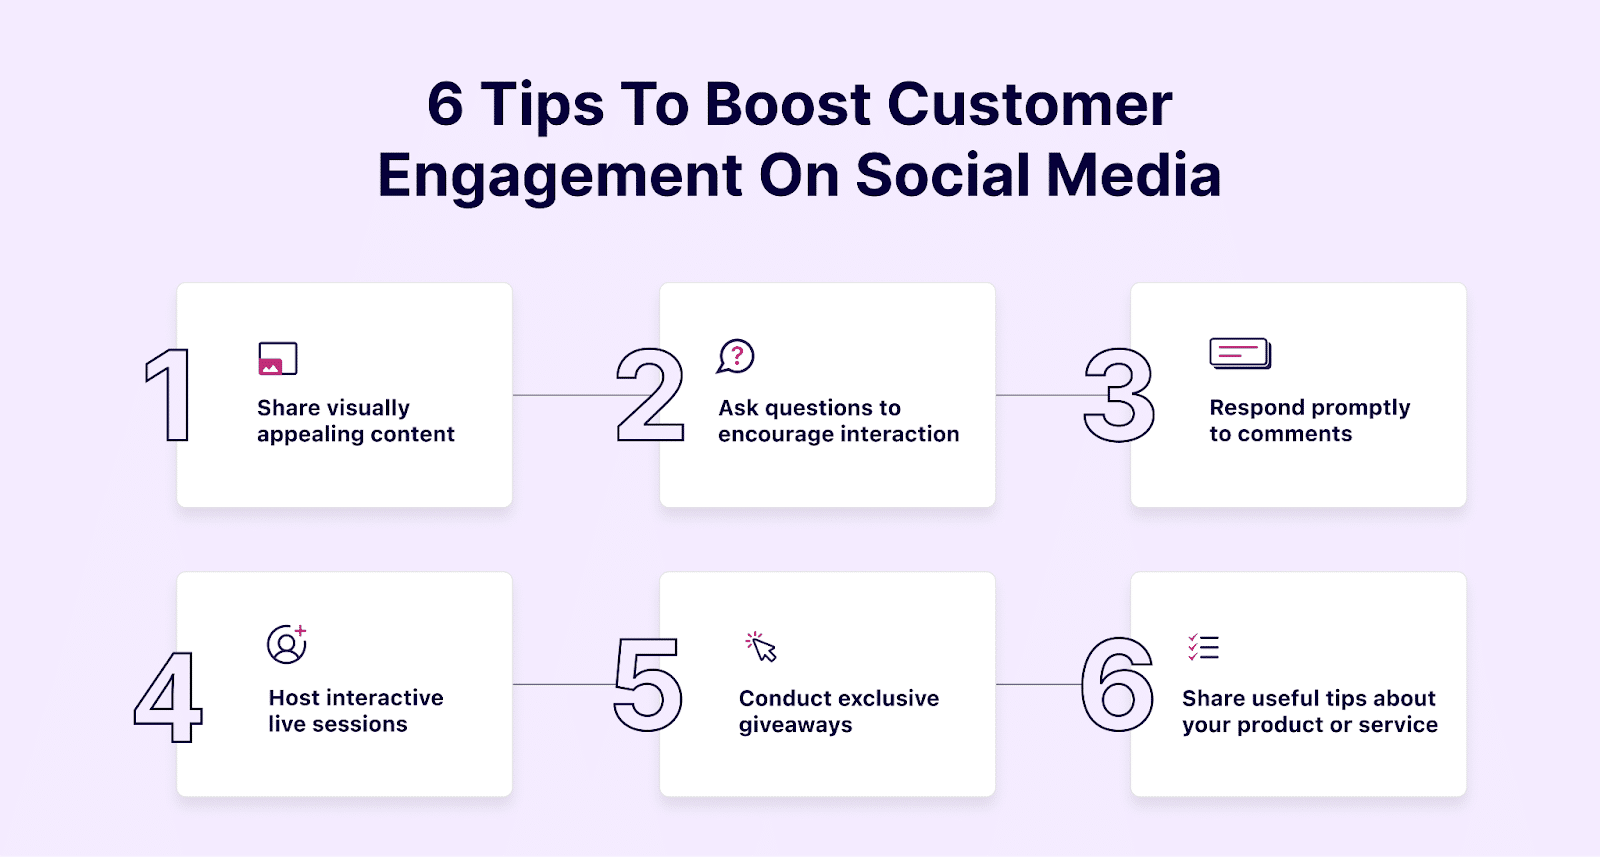 6 Tips To Boost Customer Engagement